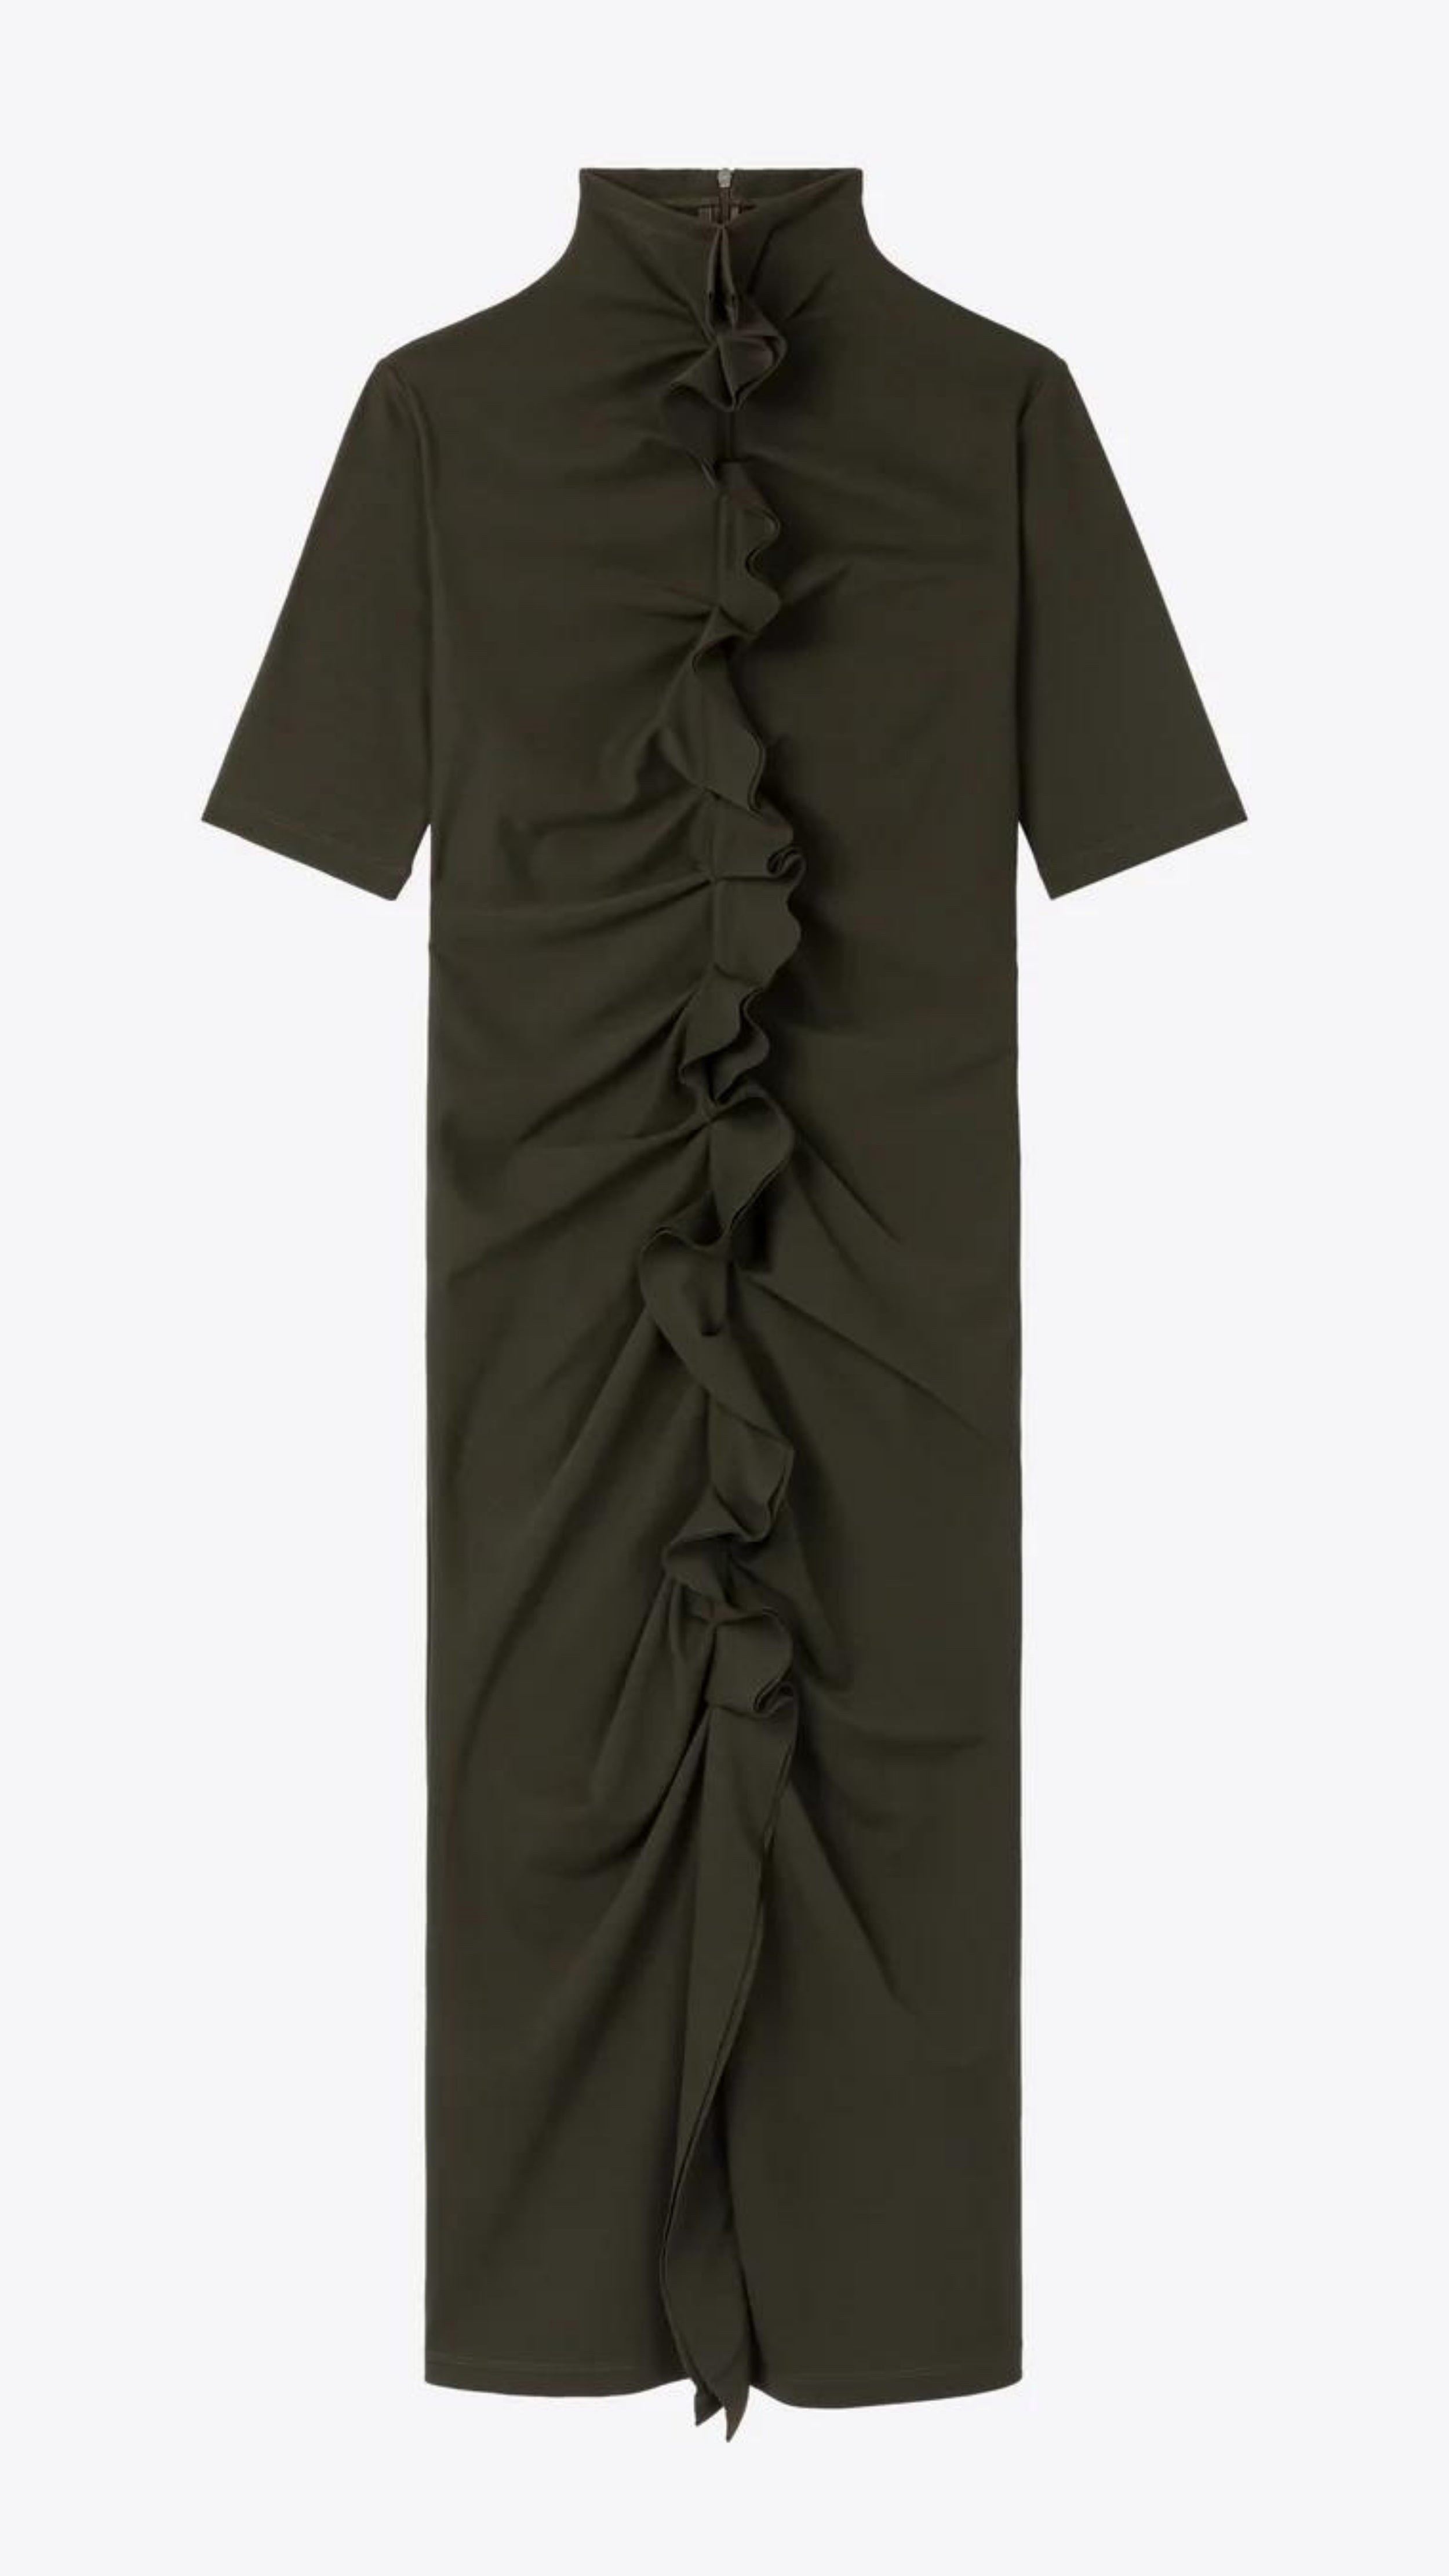 AZ Factory Colville Molly Molloy Lucinda Chambers, Ruffled Turtle Neck Dress A ruffled turtle neck dress. It is fitted with a loose T-neckline, ruffling up the front center and short sleeves. This dress has a midi length hemline.  Flat product photo